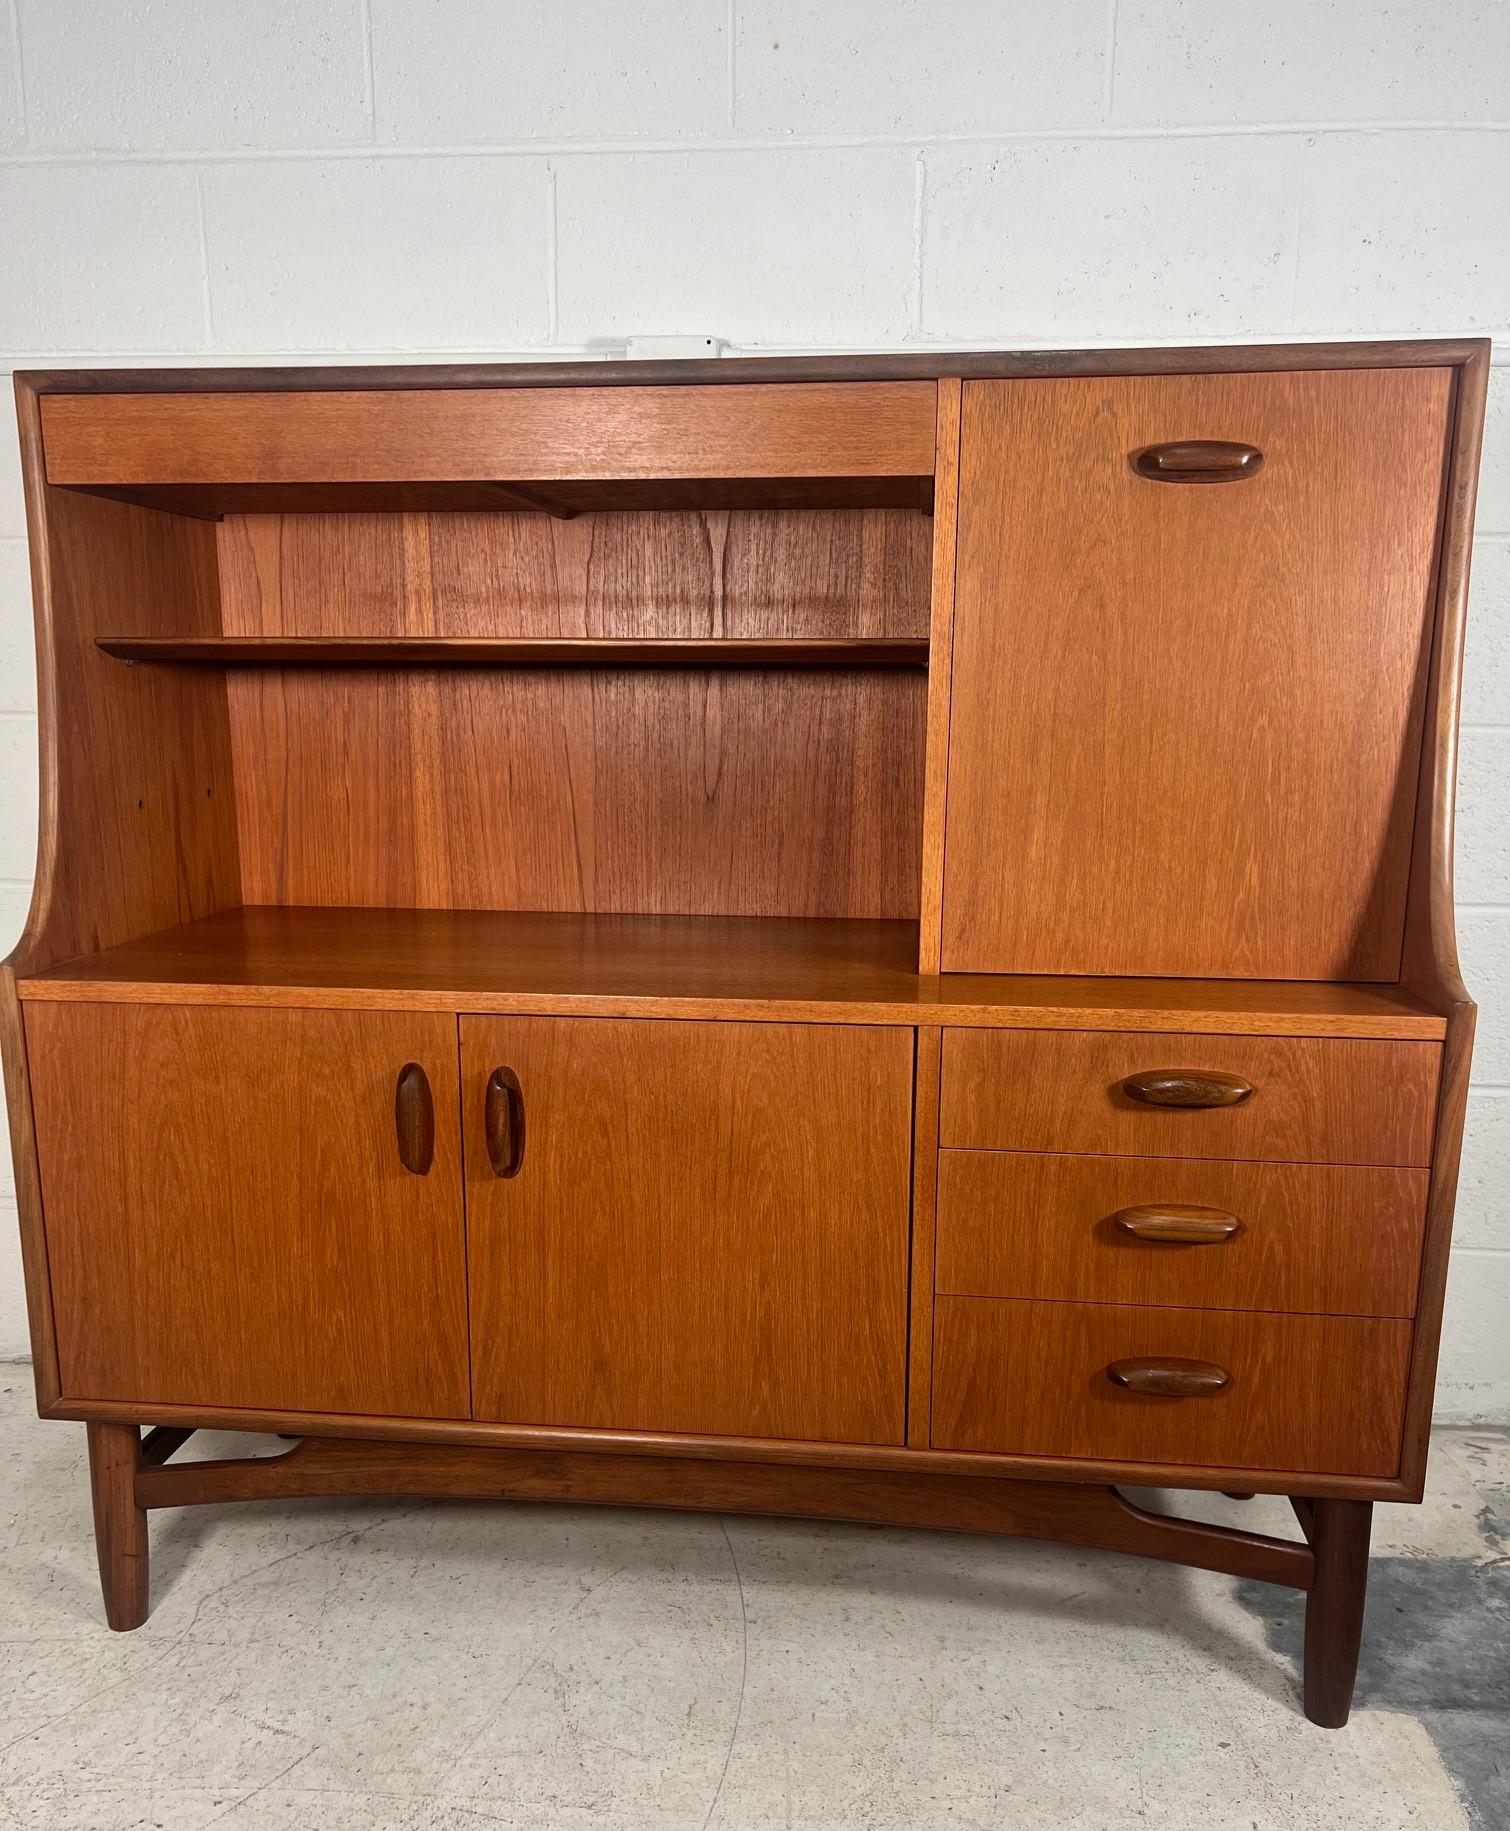 Mid century modern versatile teak highboard or server by G Plan. Featuring a drop down cabinet that can be used as a small desk and a drawer for silver ware at the top.

Three drawers and a cabinet with removable shelf at the bottom.
Very good